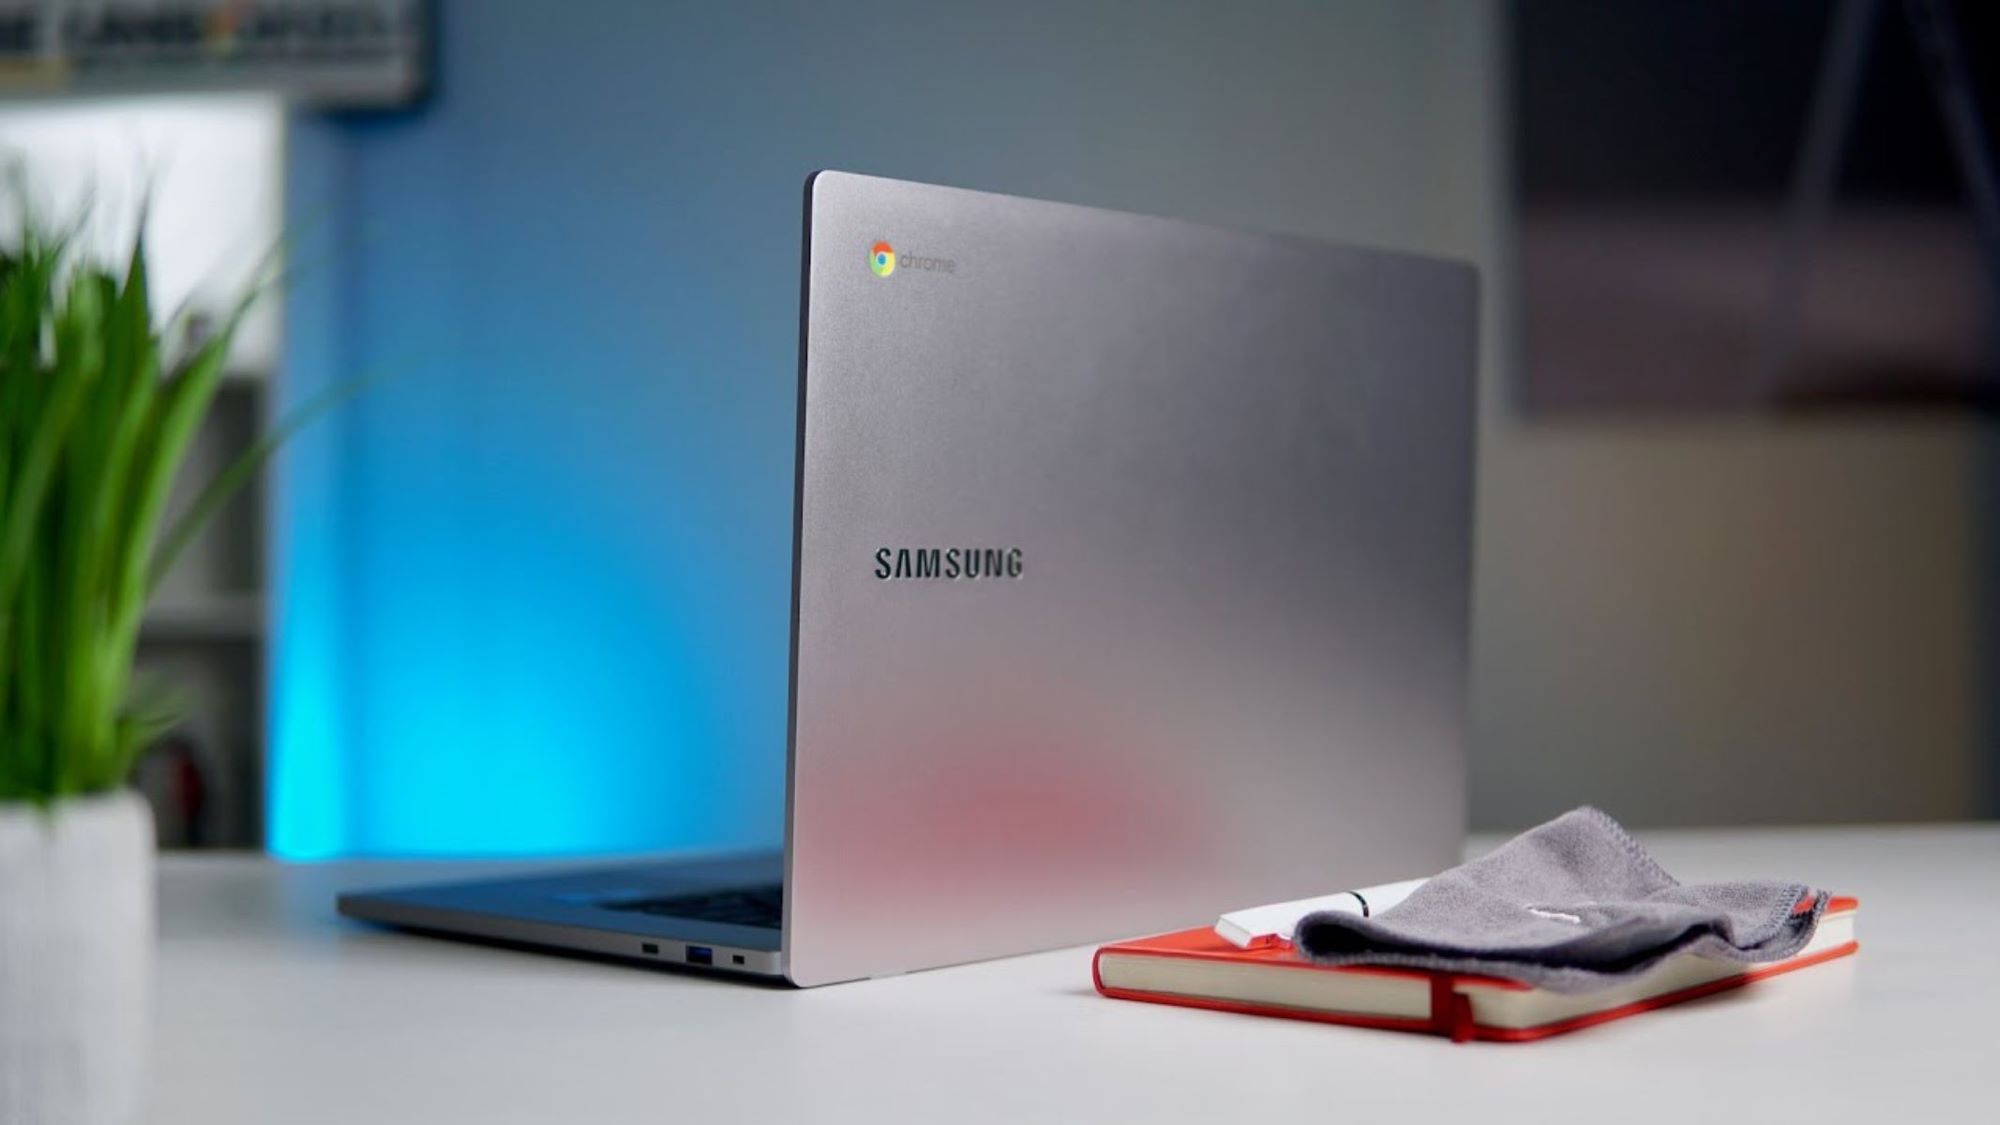 How To Factory Reset A Samsung Laptop